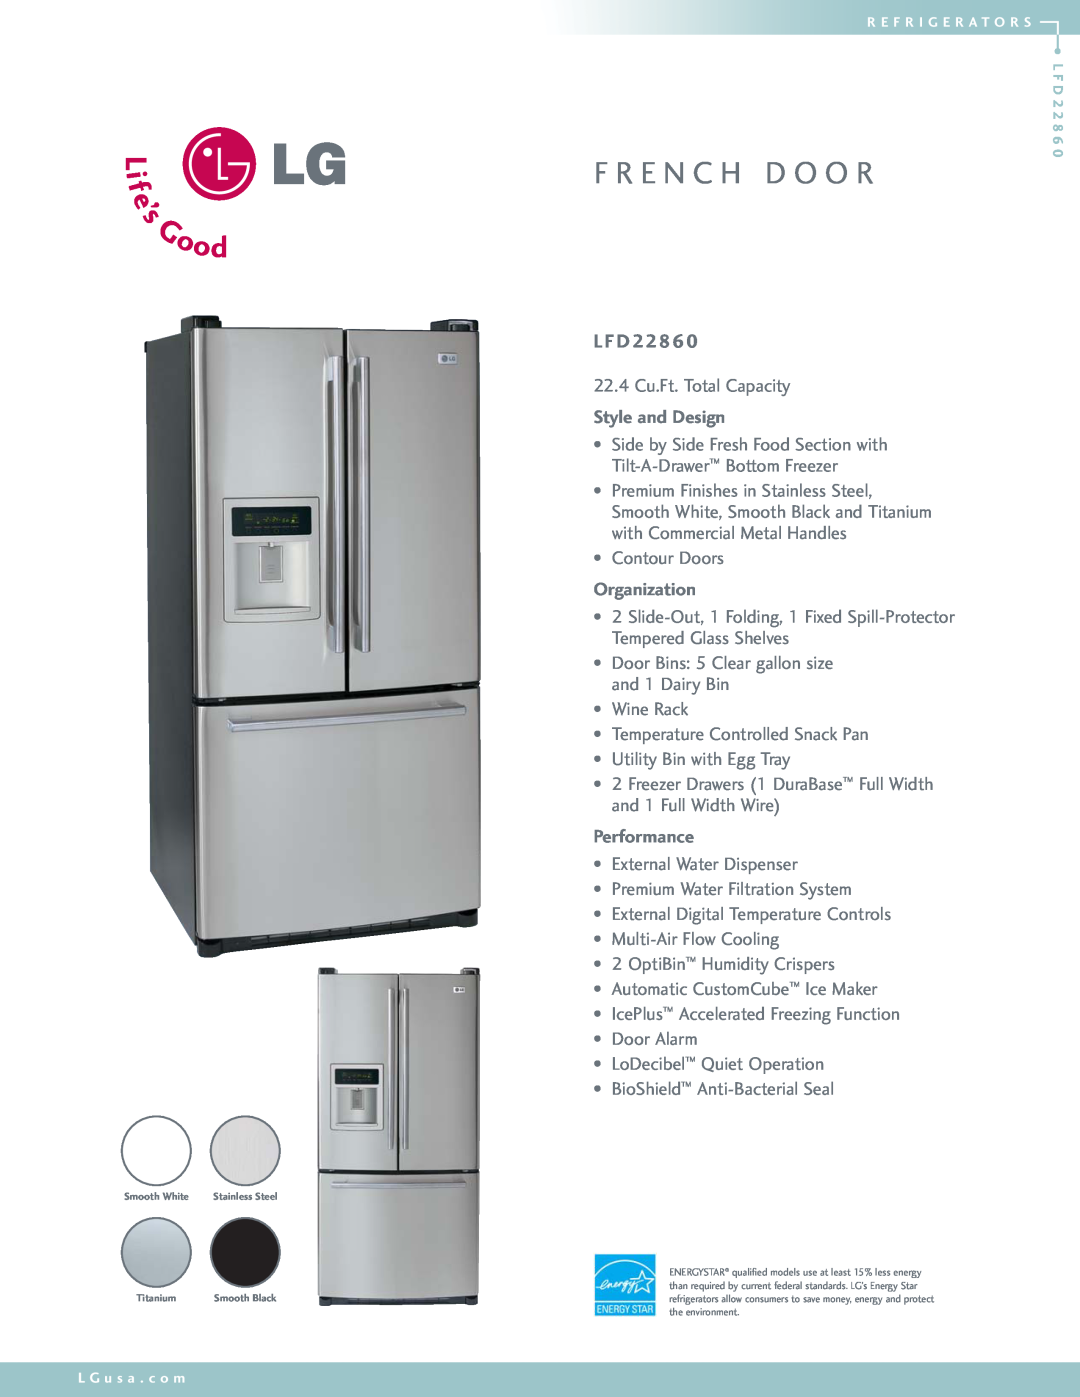 LG Electronics LFD22860 manual F R E N C H D O O R, L F D, Style and Design, Organization, Performance 